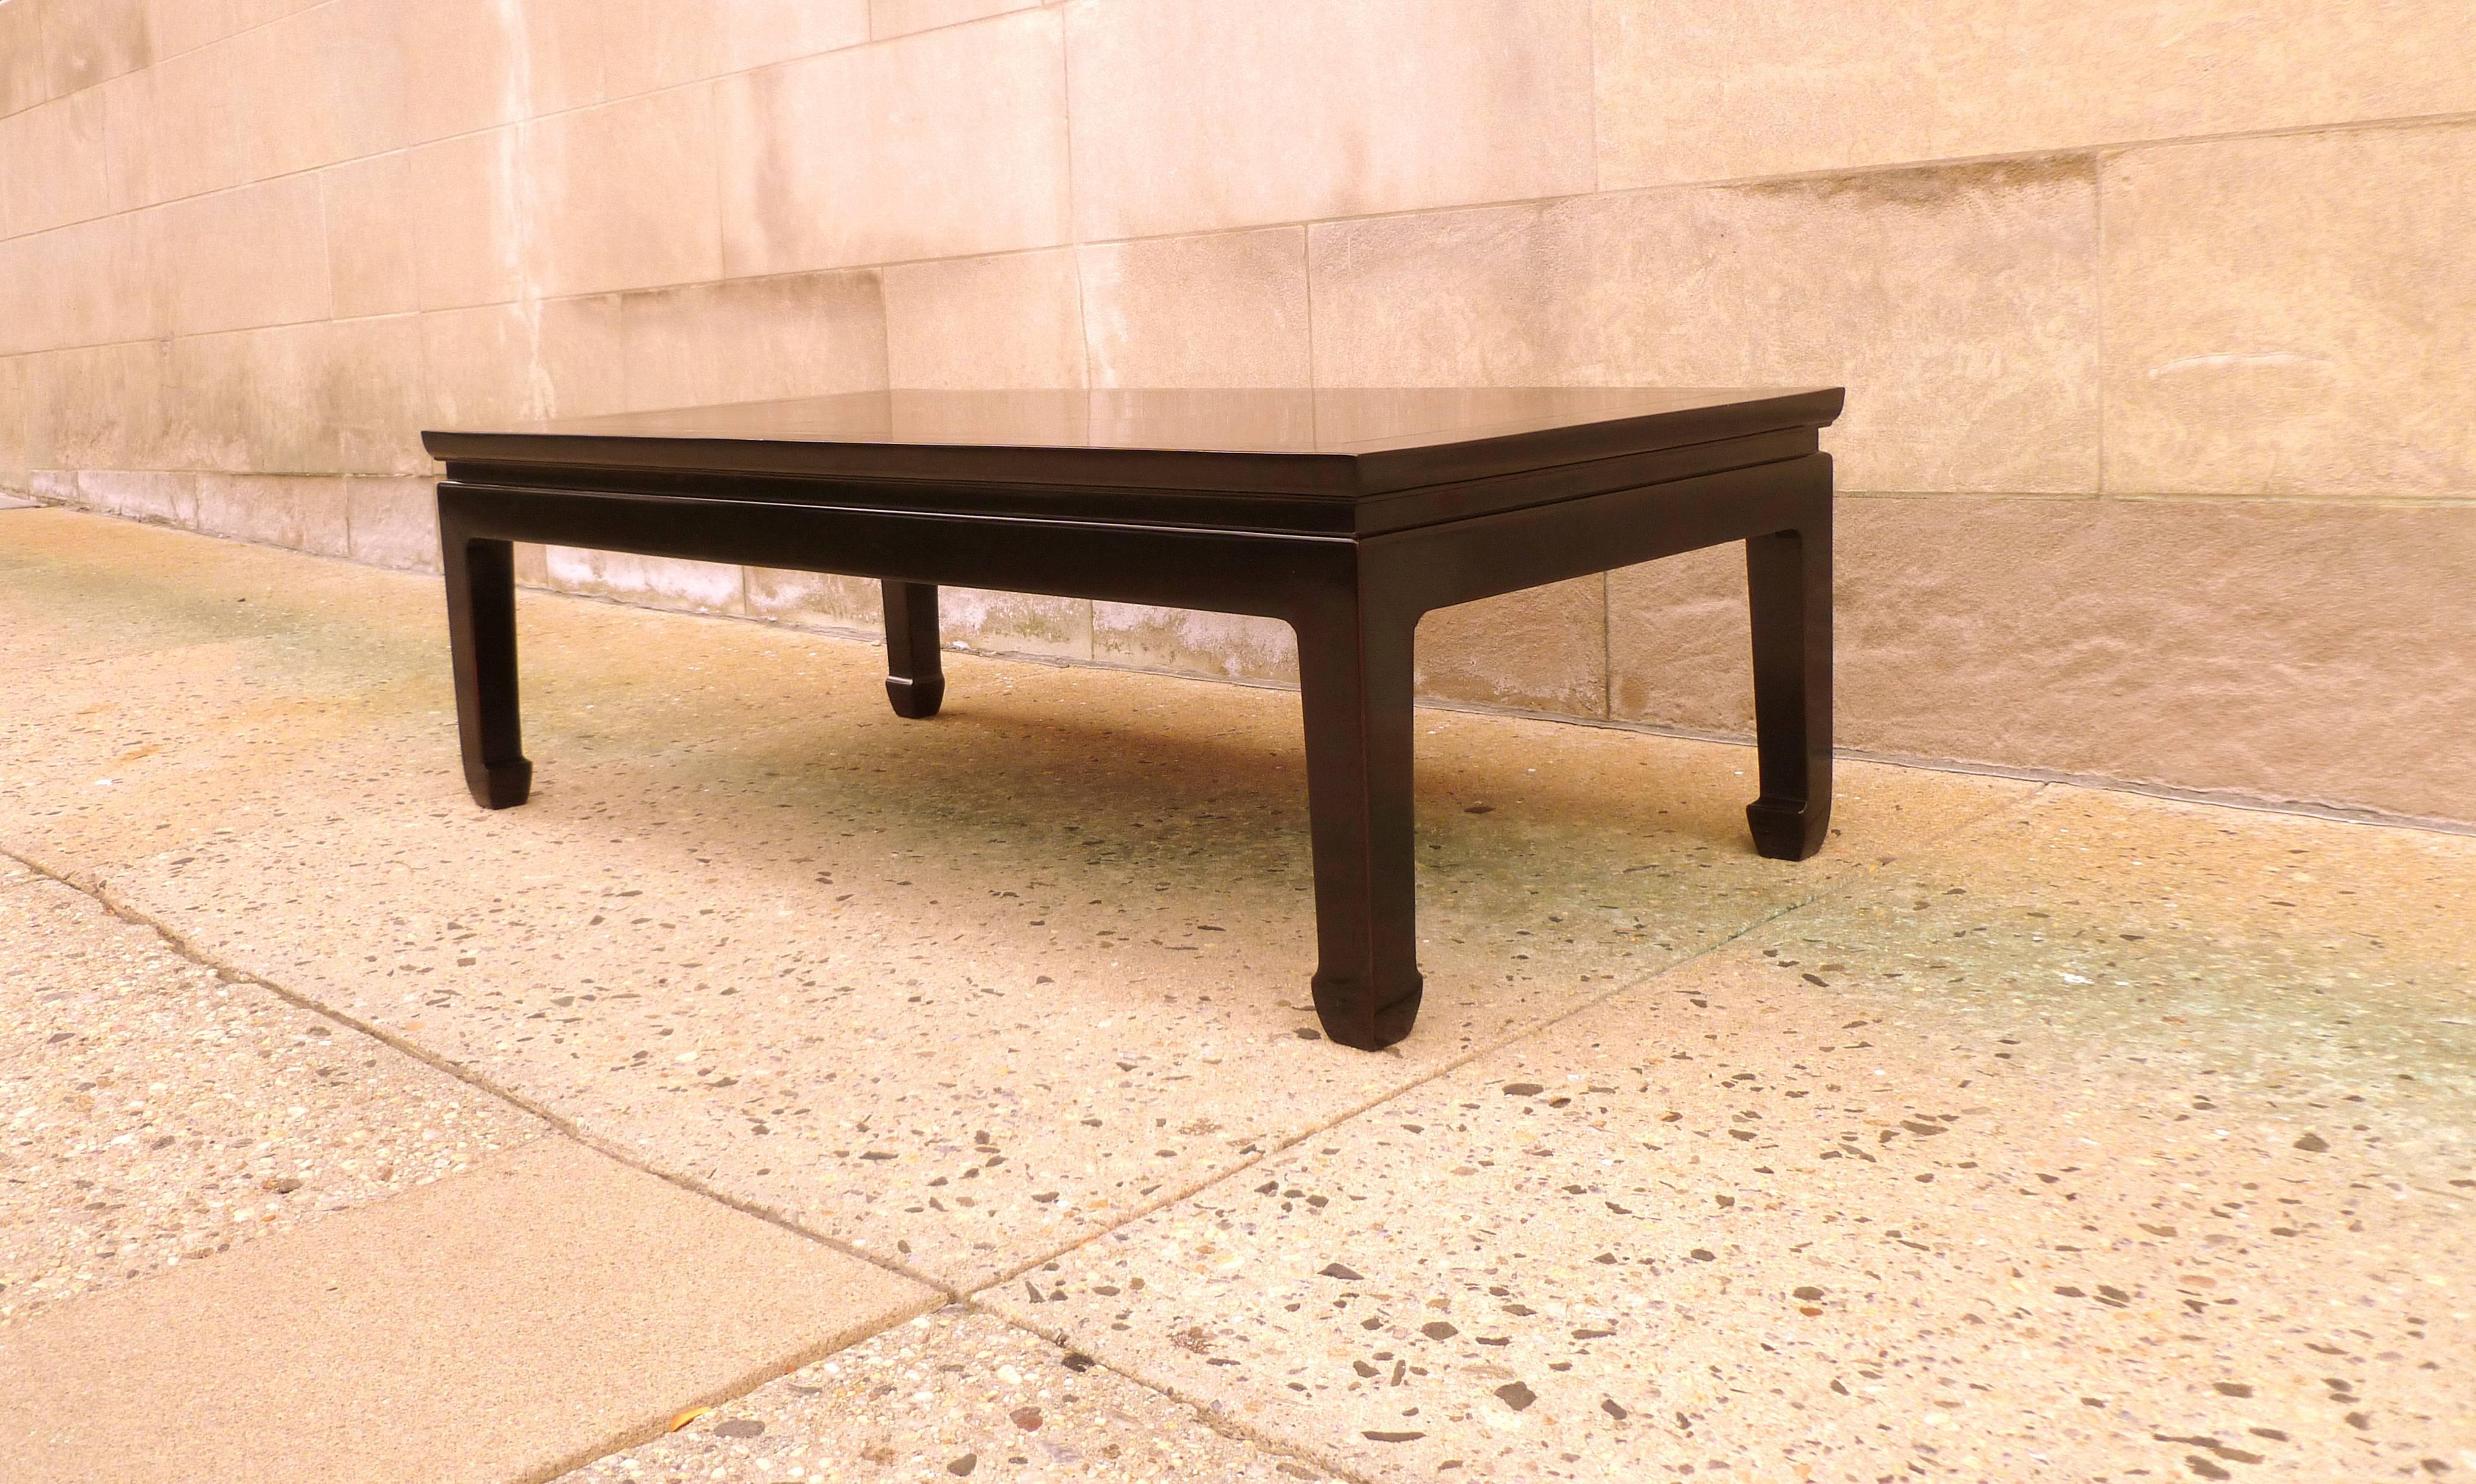 Polished Fine Black Lacquer Rectangular Low Table with Fine Hand Painted Landscape Motif